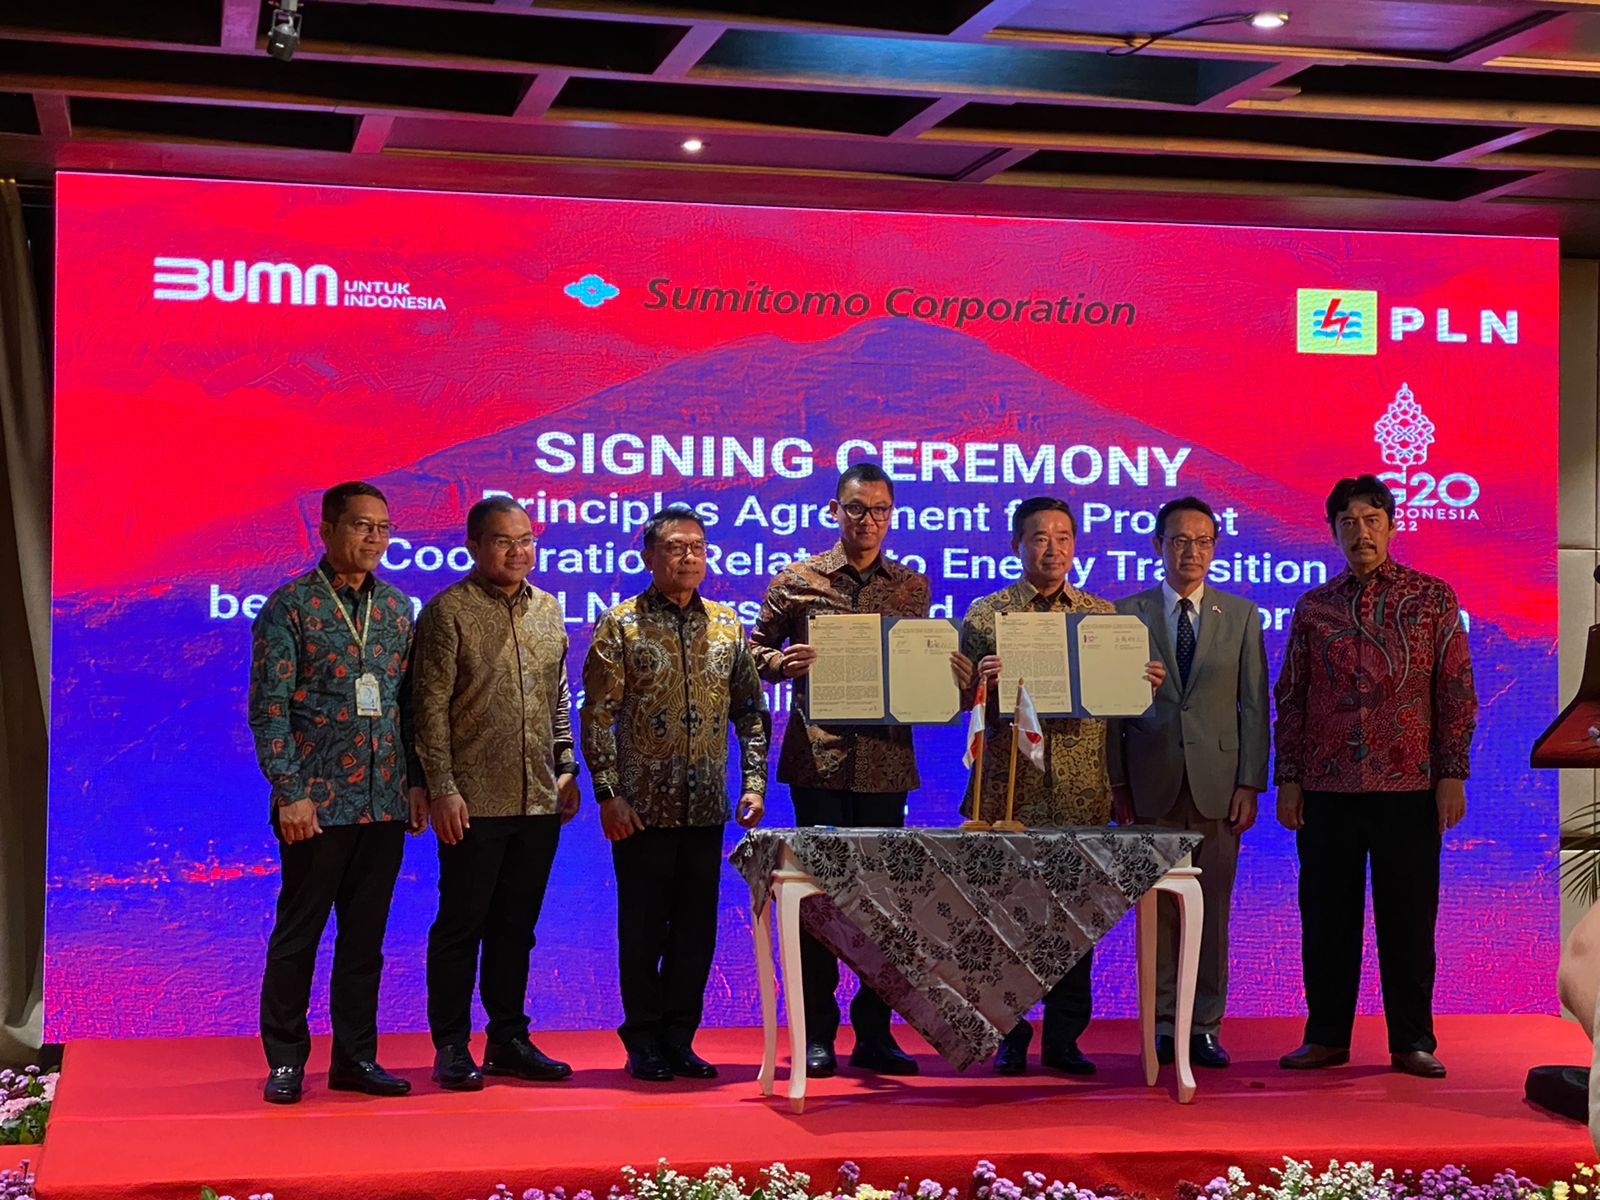 The Signing  Ceremony of Principles Agreement for Project Cooperation Related  to Energy Transition between PLN and Sumitomo Corporation yang digelar di sela-sela perhelatan G20 di Hotel  Intercontinental Sanur Denpasar, Minggu (13/11). 